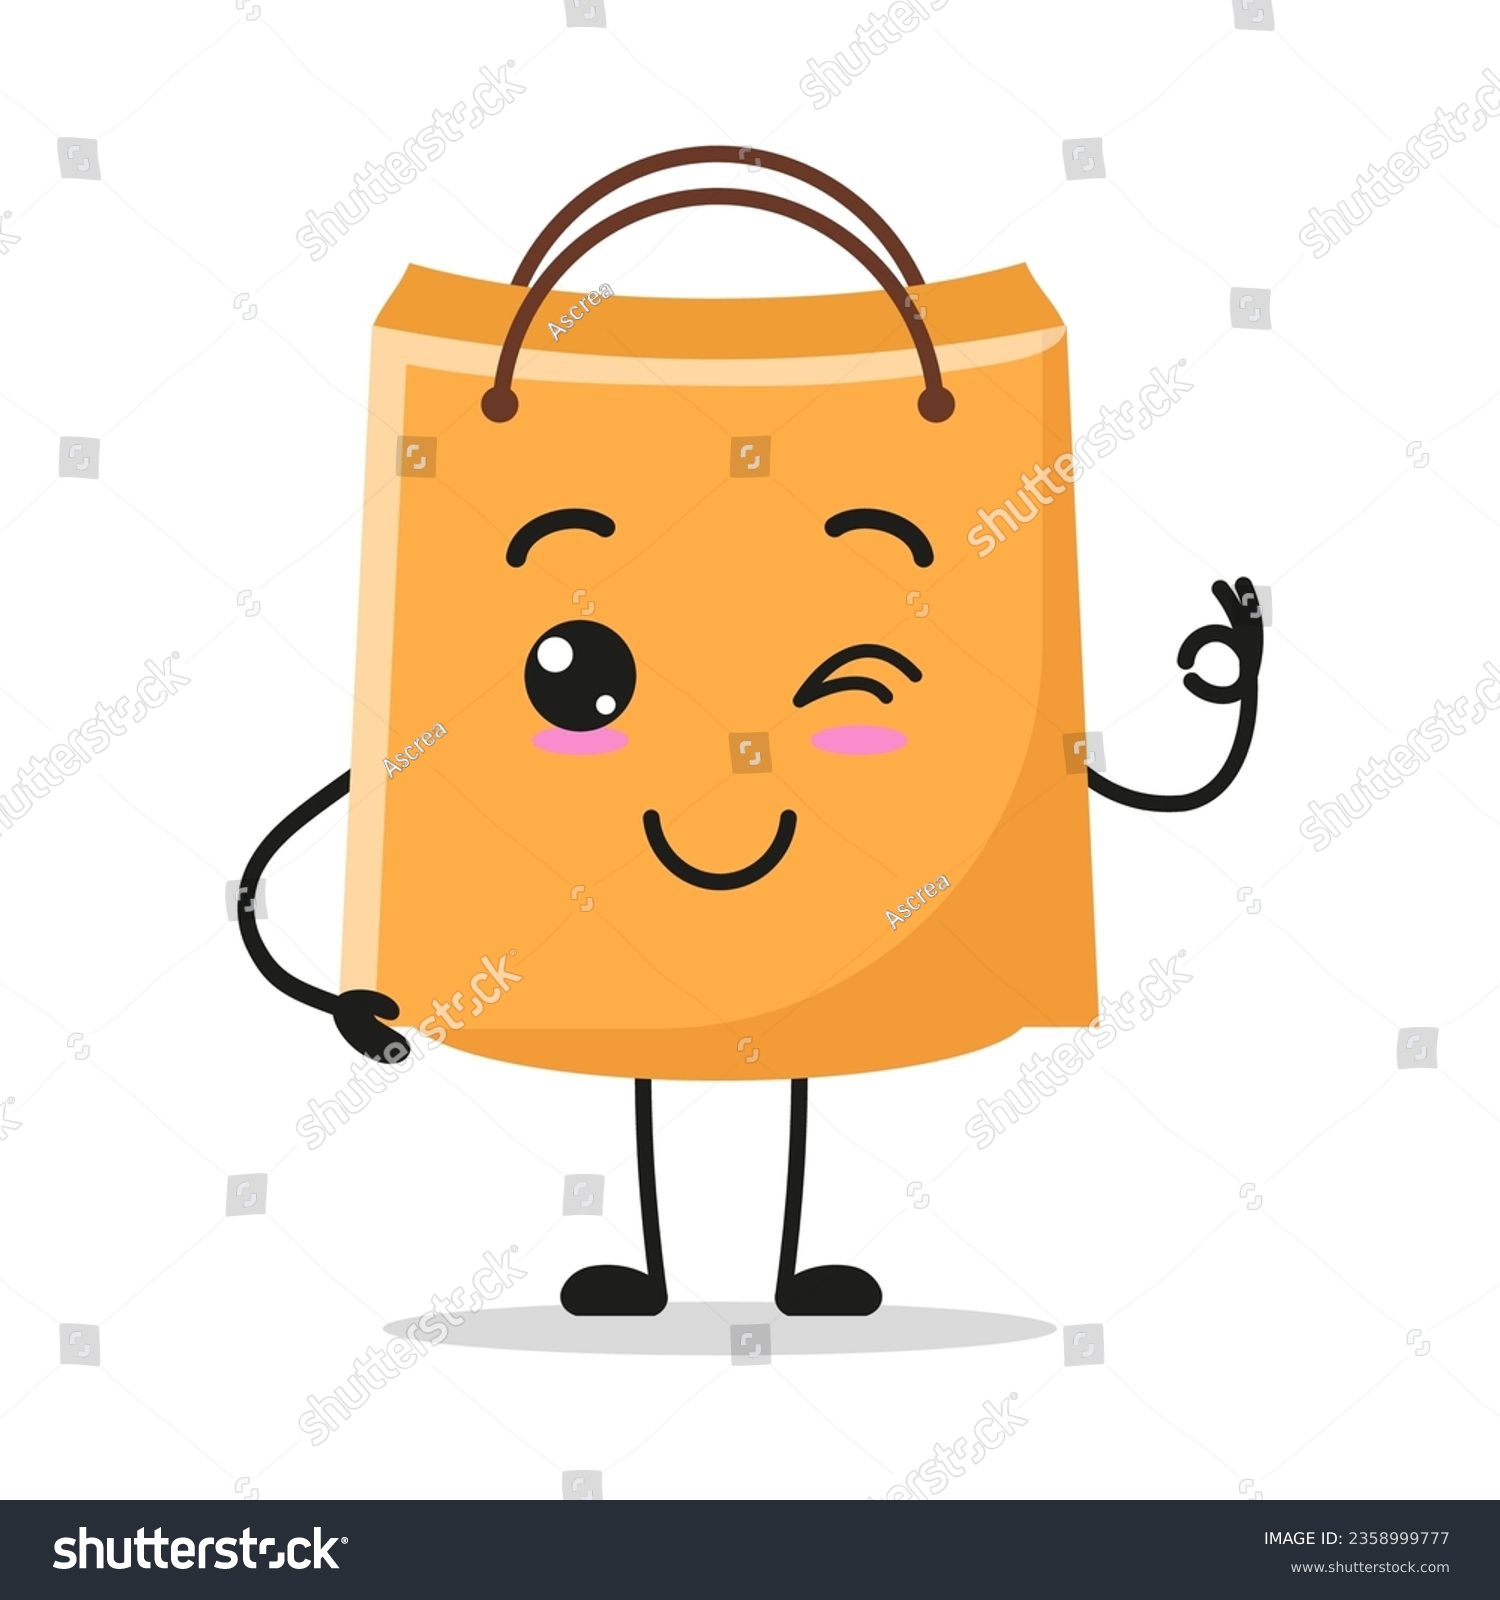 SVG of Cute shopping bag character. Funny smiling and wink paper bag cartoon emoticon in flat style. bag emoji vector illustration svg